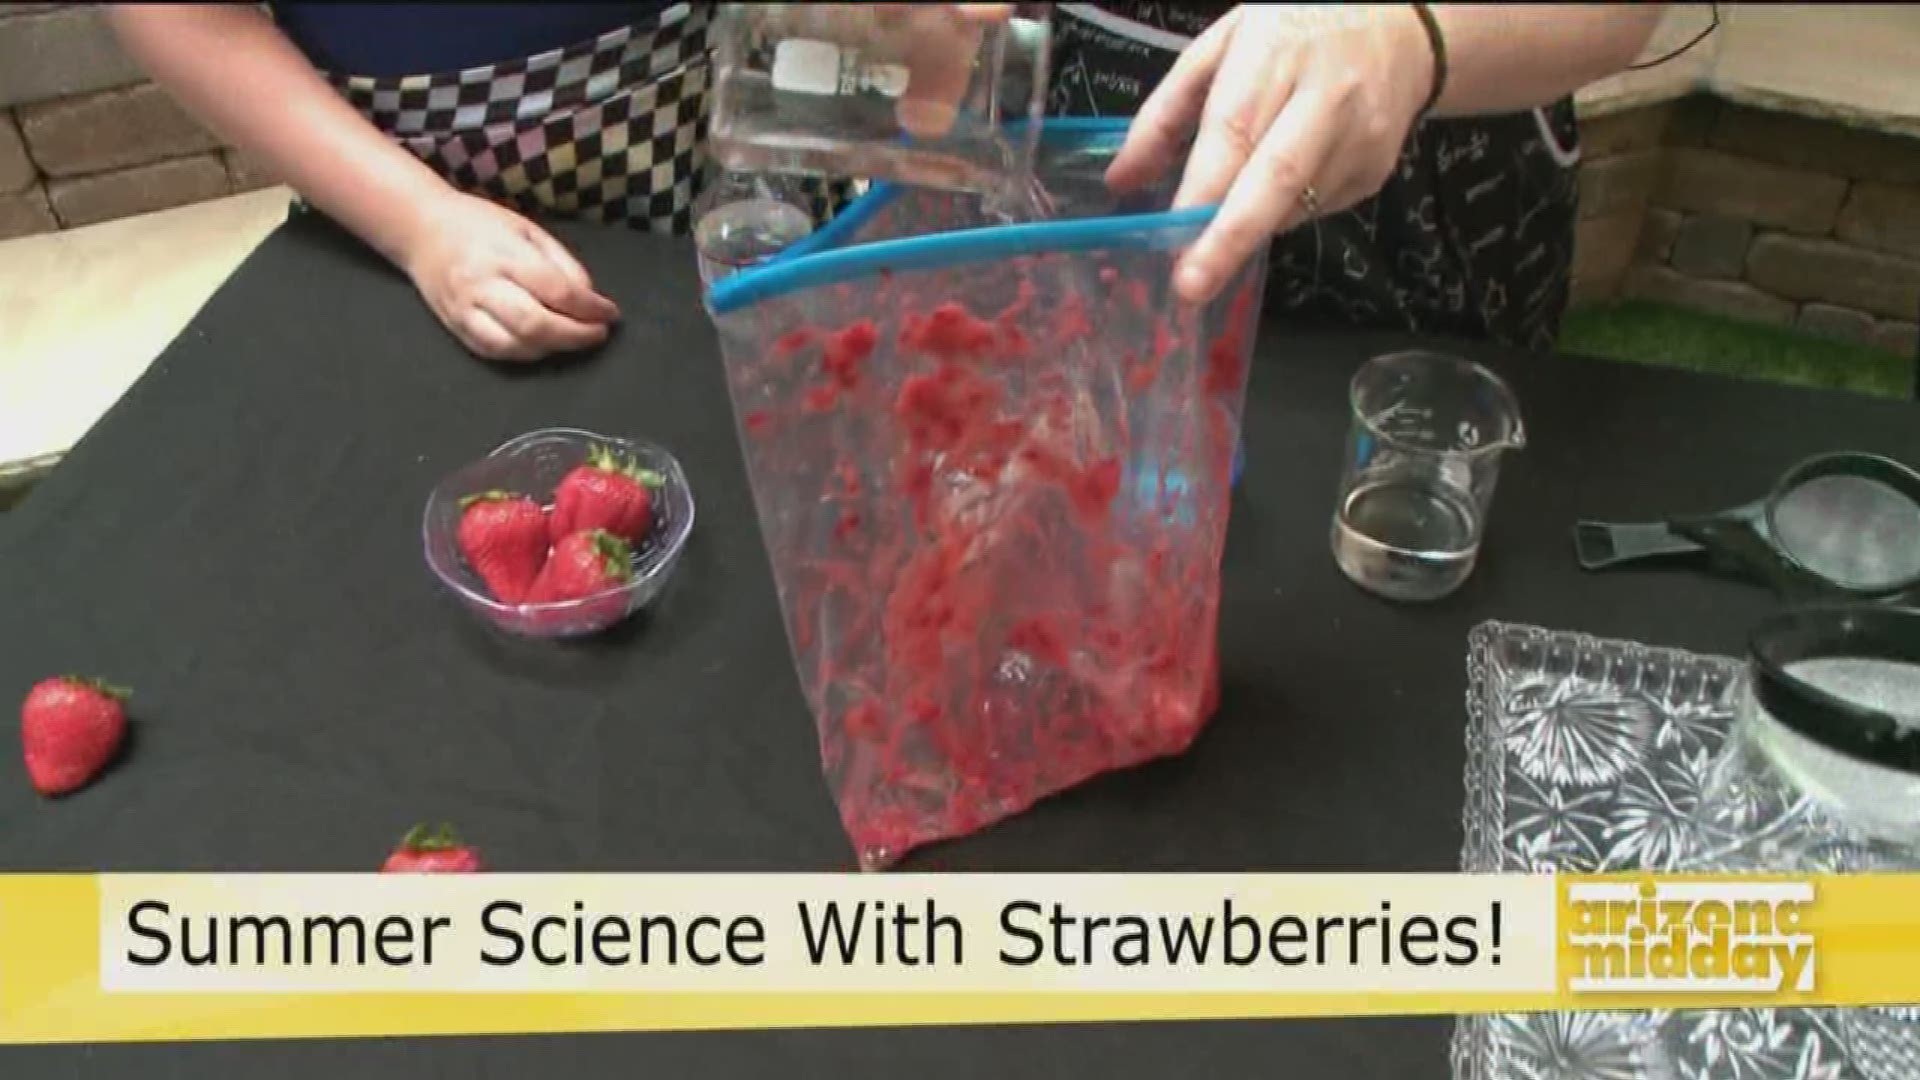 The Scientific Mom Amy Oyler and her daughter Katie are back to show us how to extract actual DNA from strawberries!